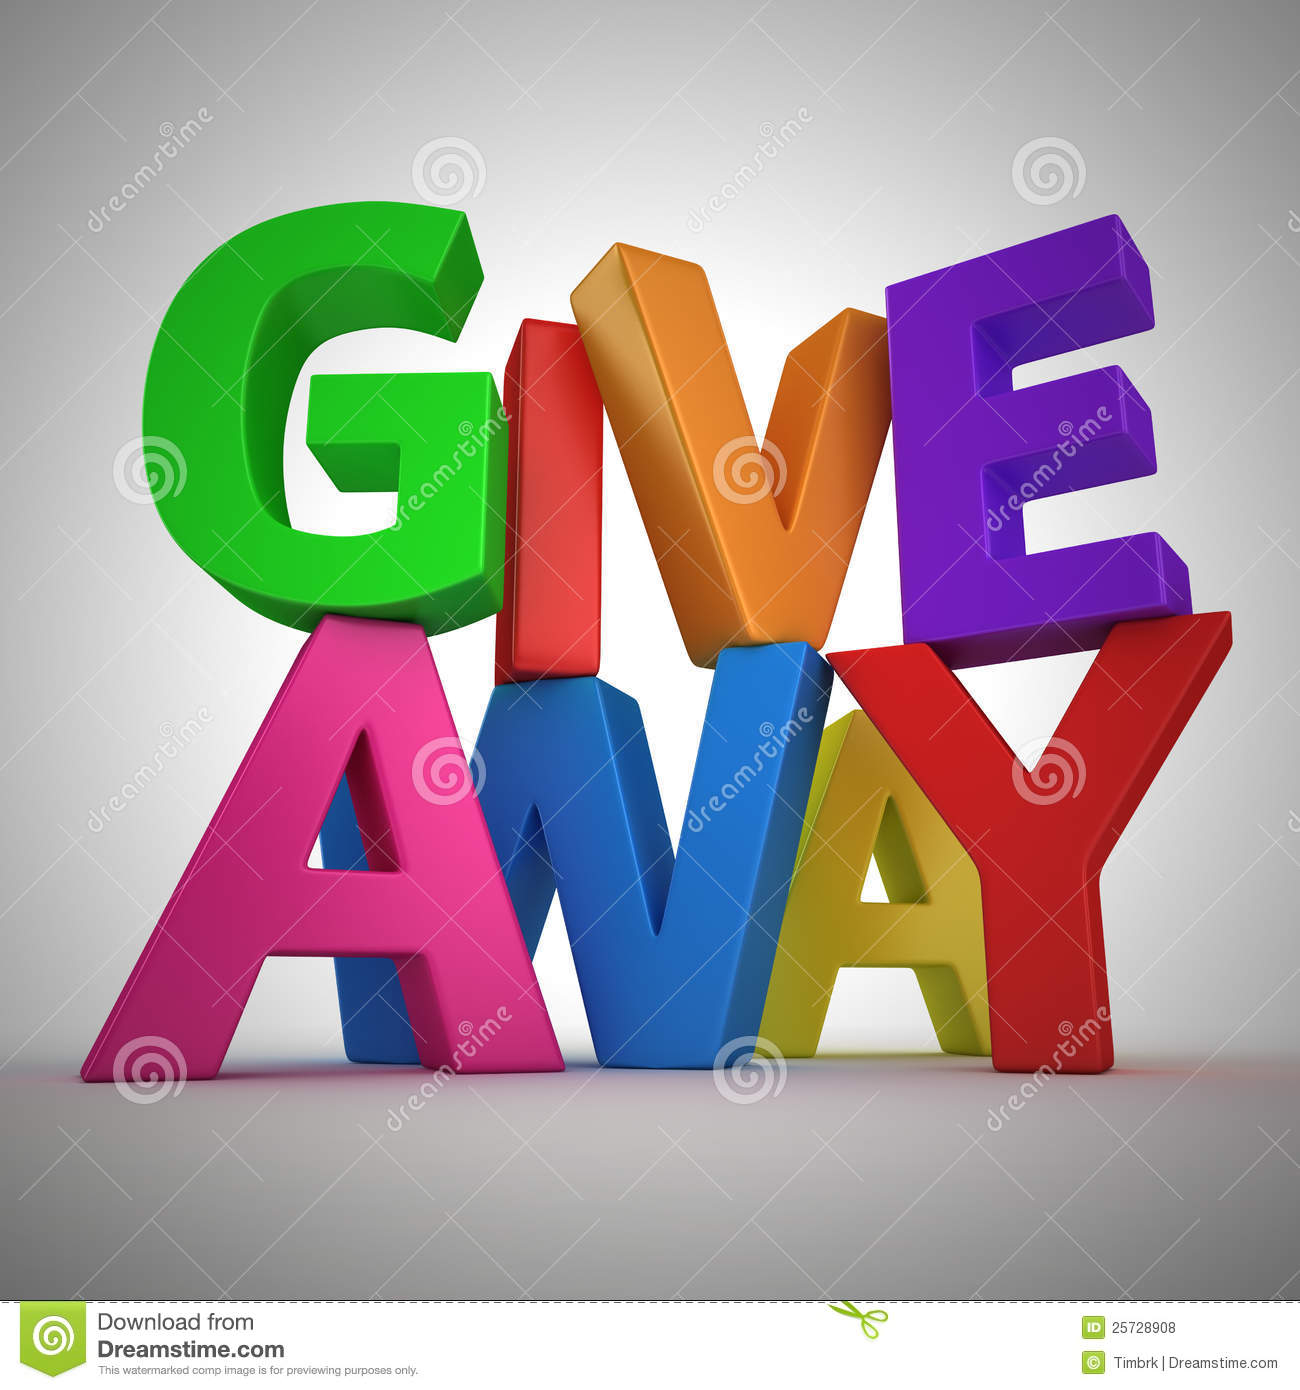 Giveaway Royalty Free Stock Photos   Image  25728908